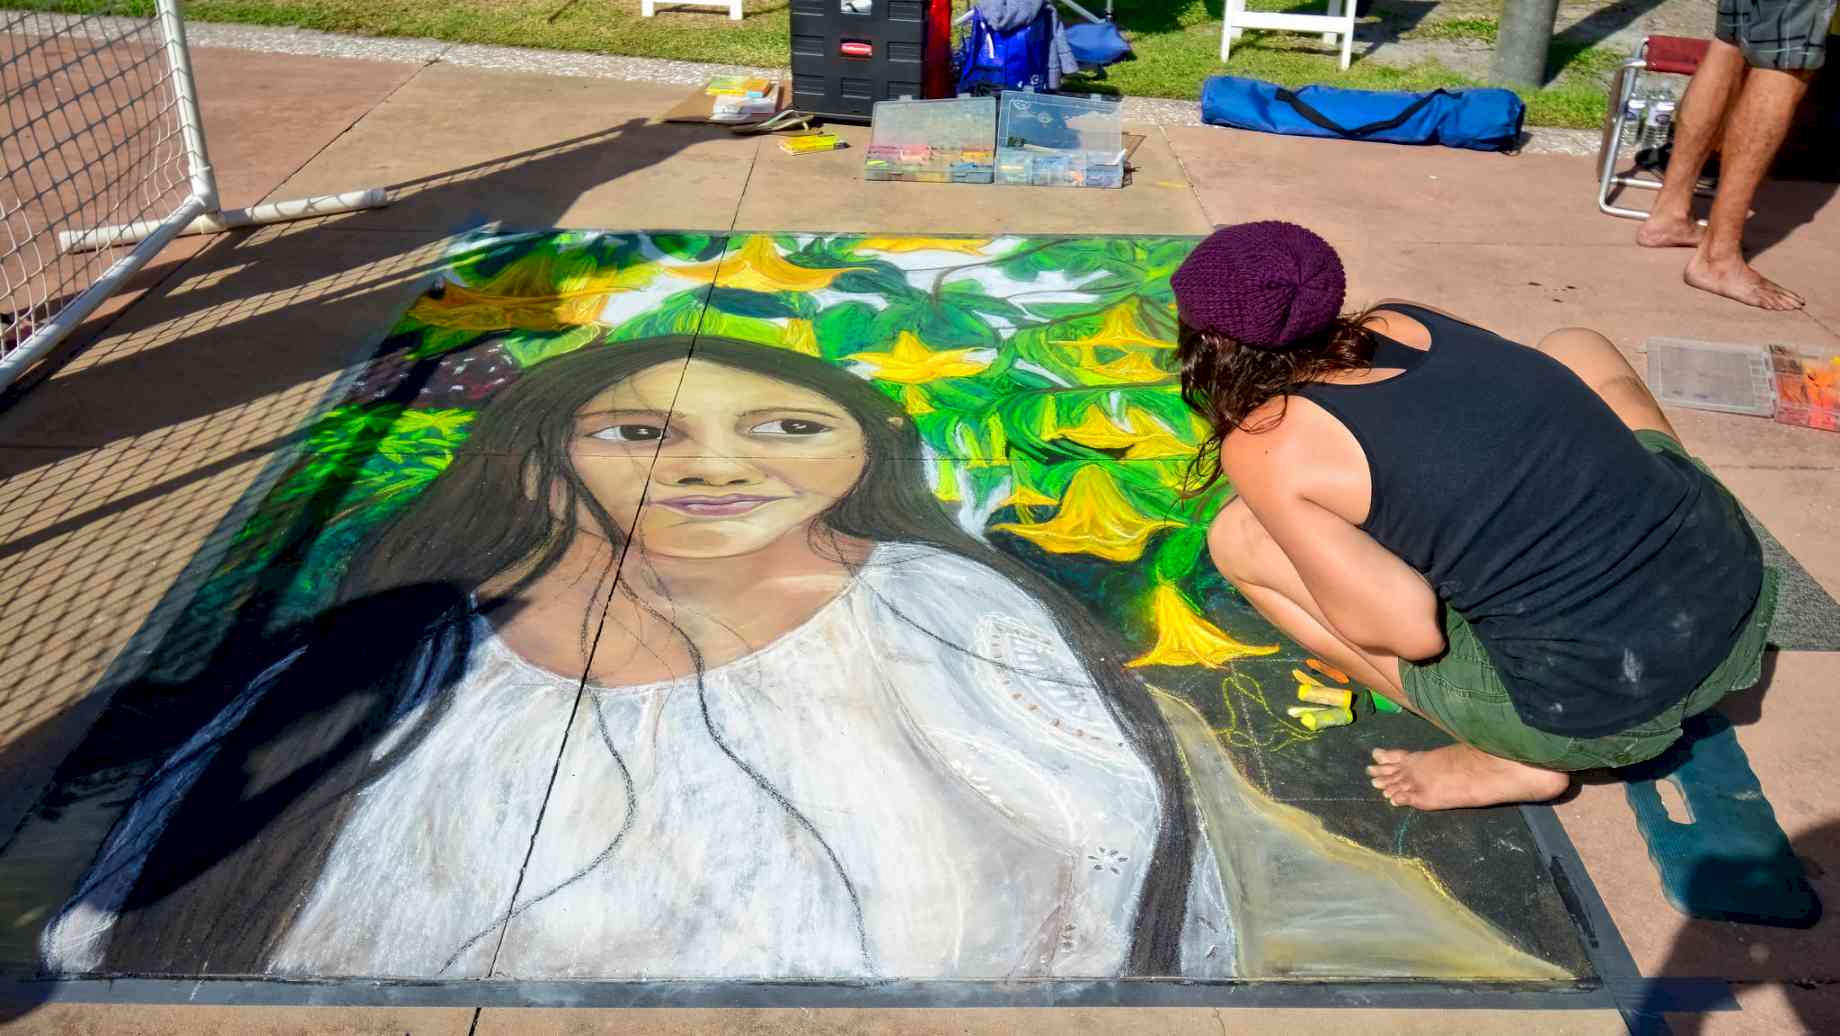 6th Annual Chalk Art Festival at Beach Walk along Clearwater Beach by Walter - Licensed by CC 2.0